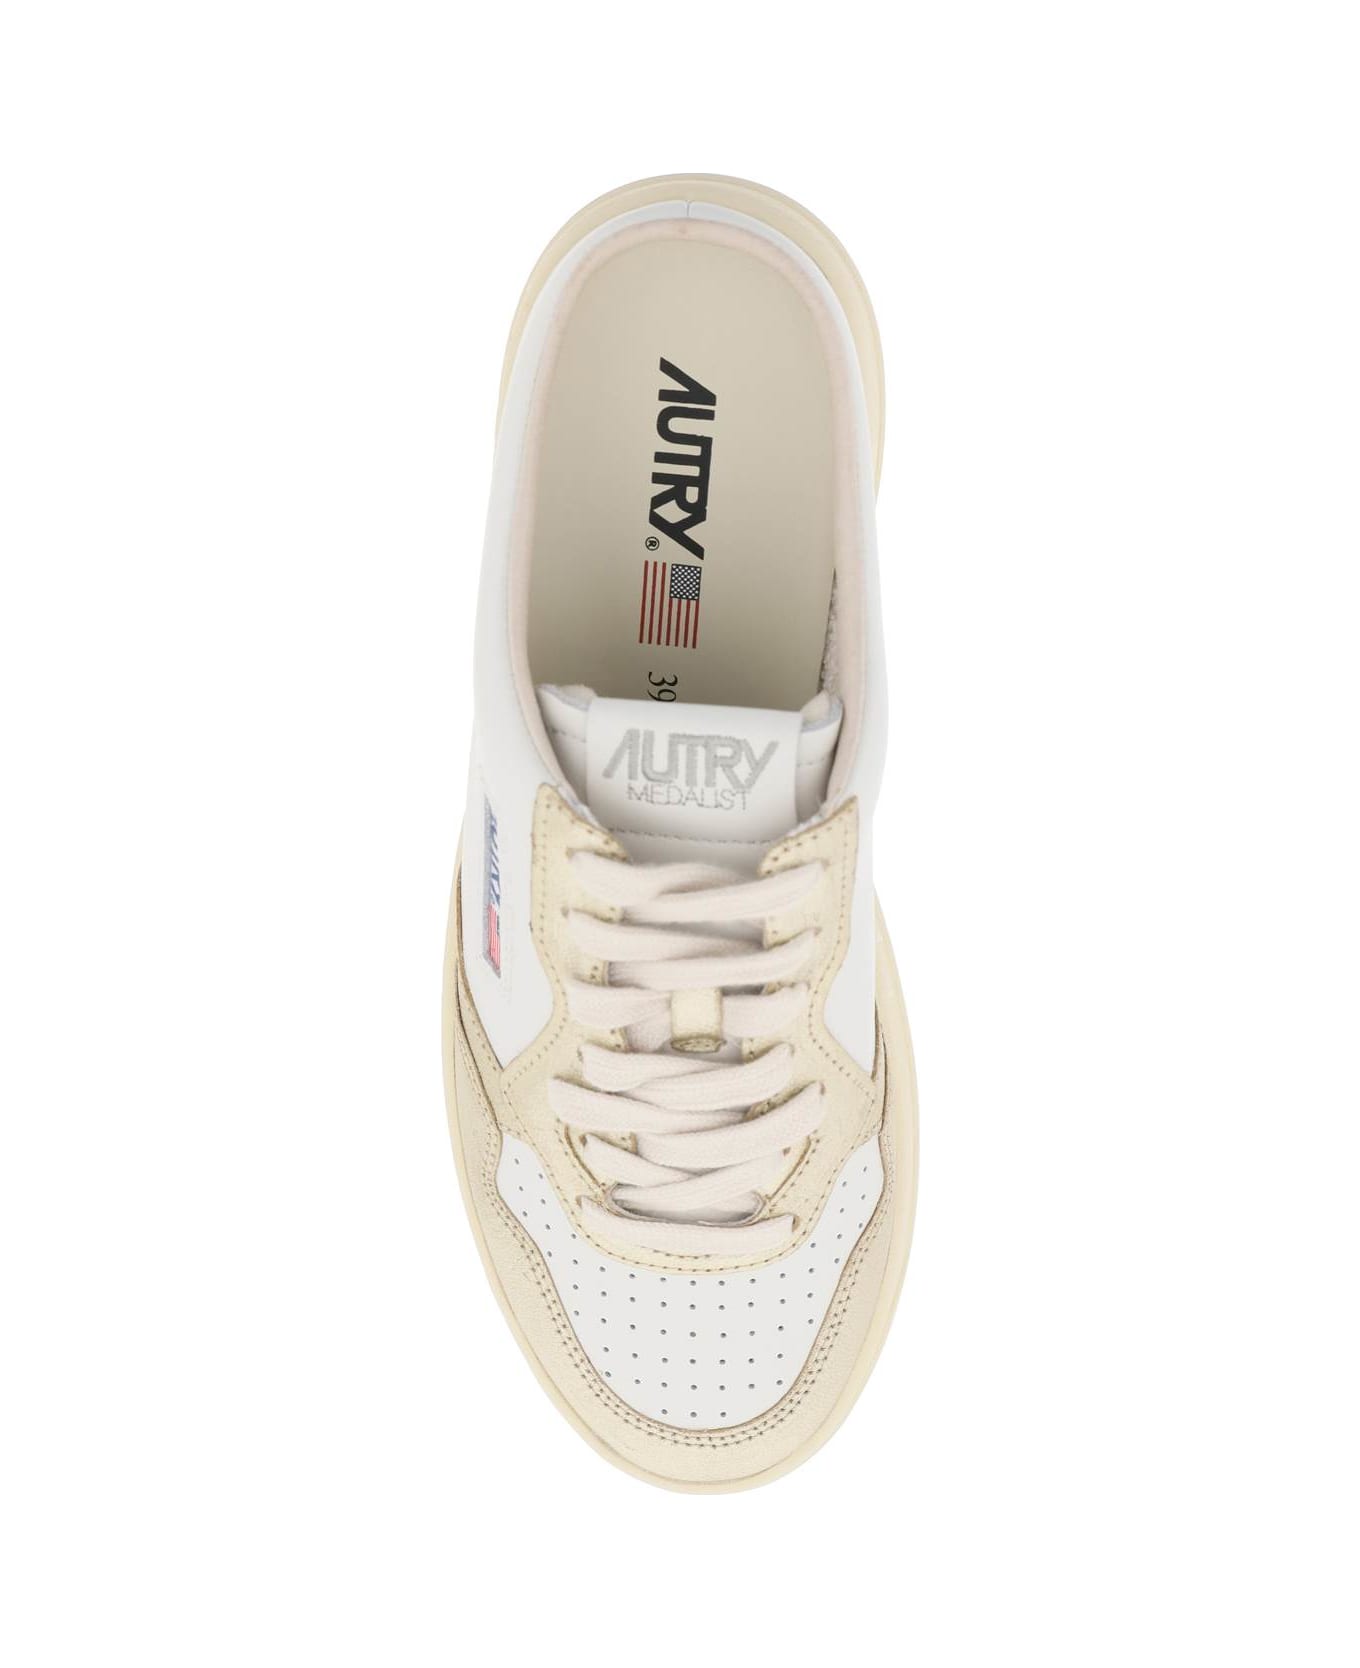 Autry Medalist Mule Low Sneakers - WHITE PLATINUM (White)